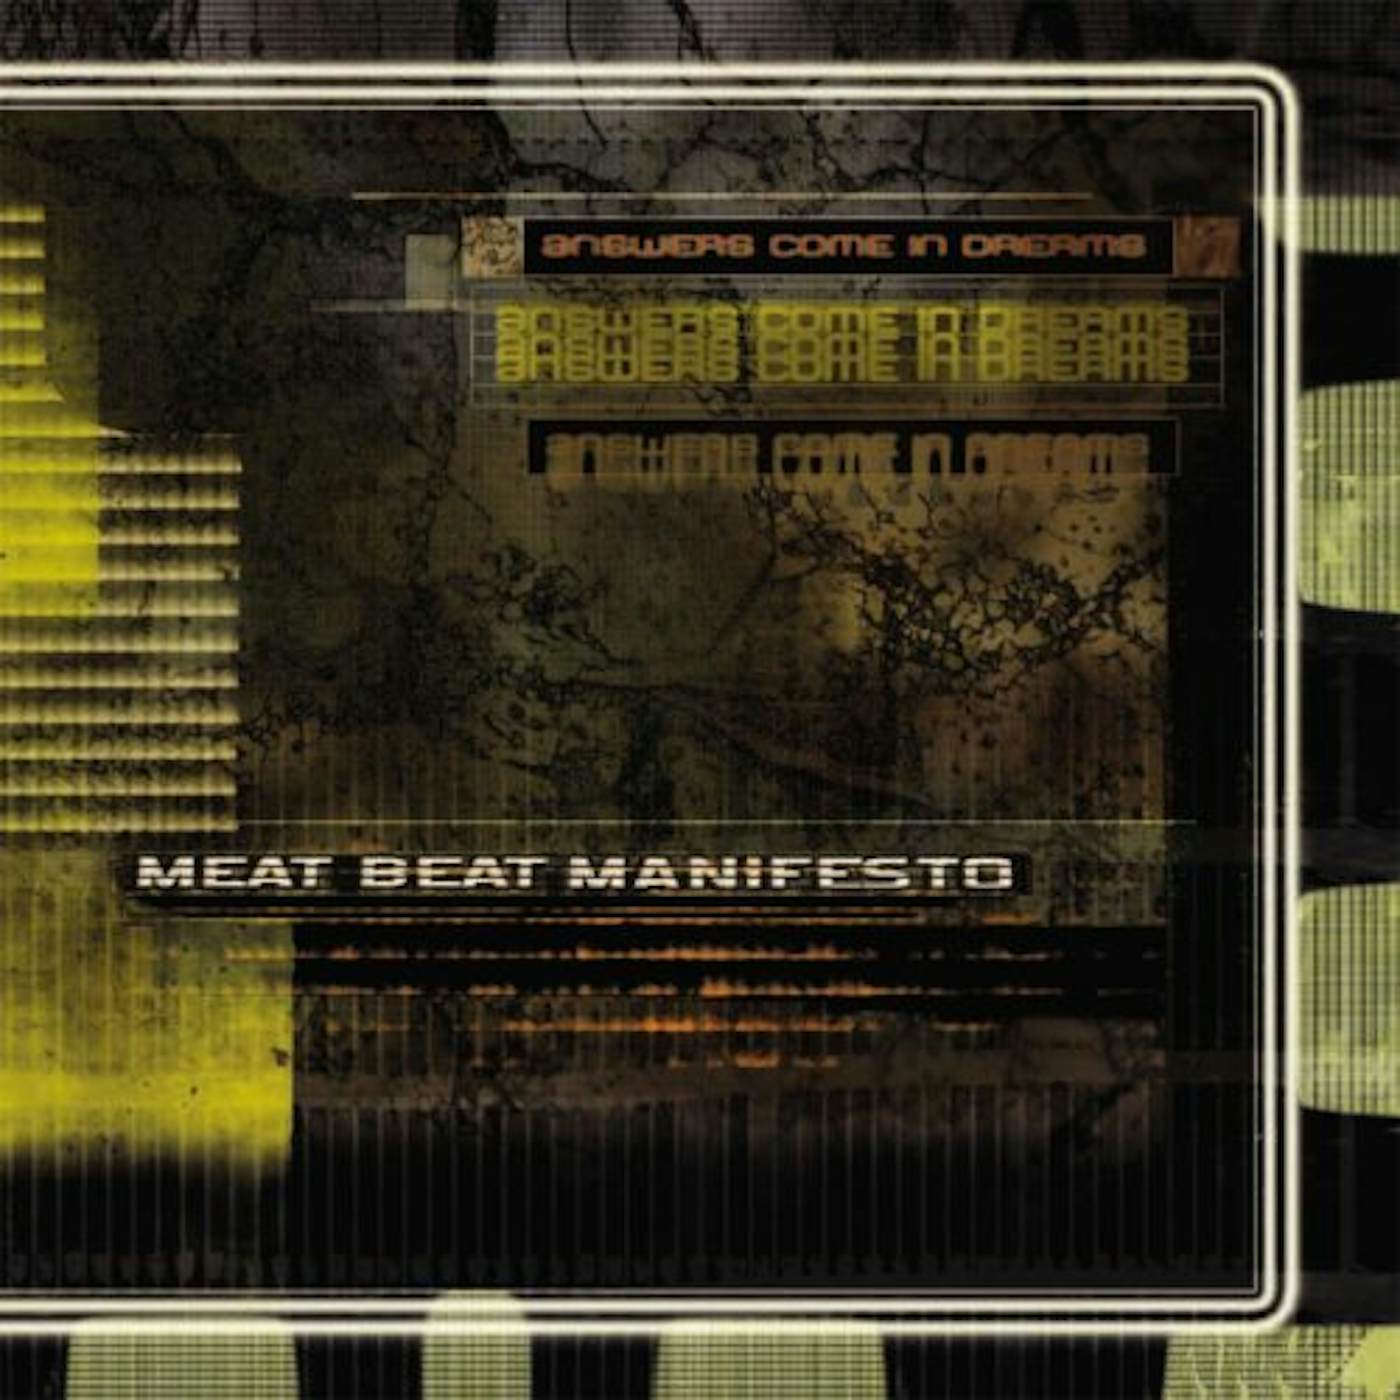 Meat Beat Manifesto Answers Come In Dreams Vinyl Record